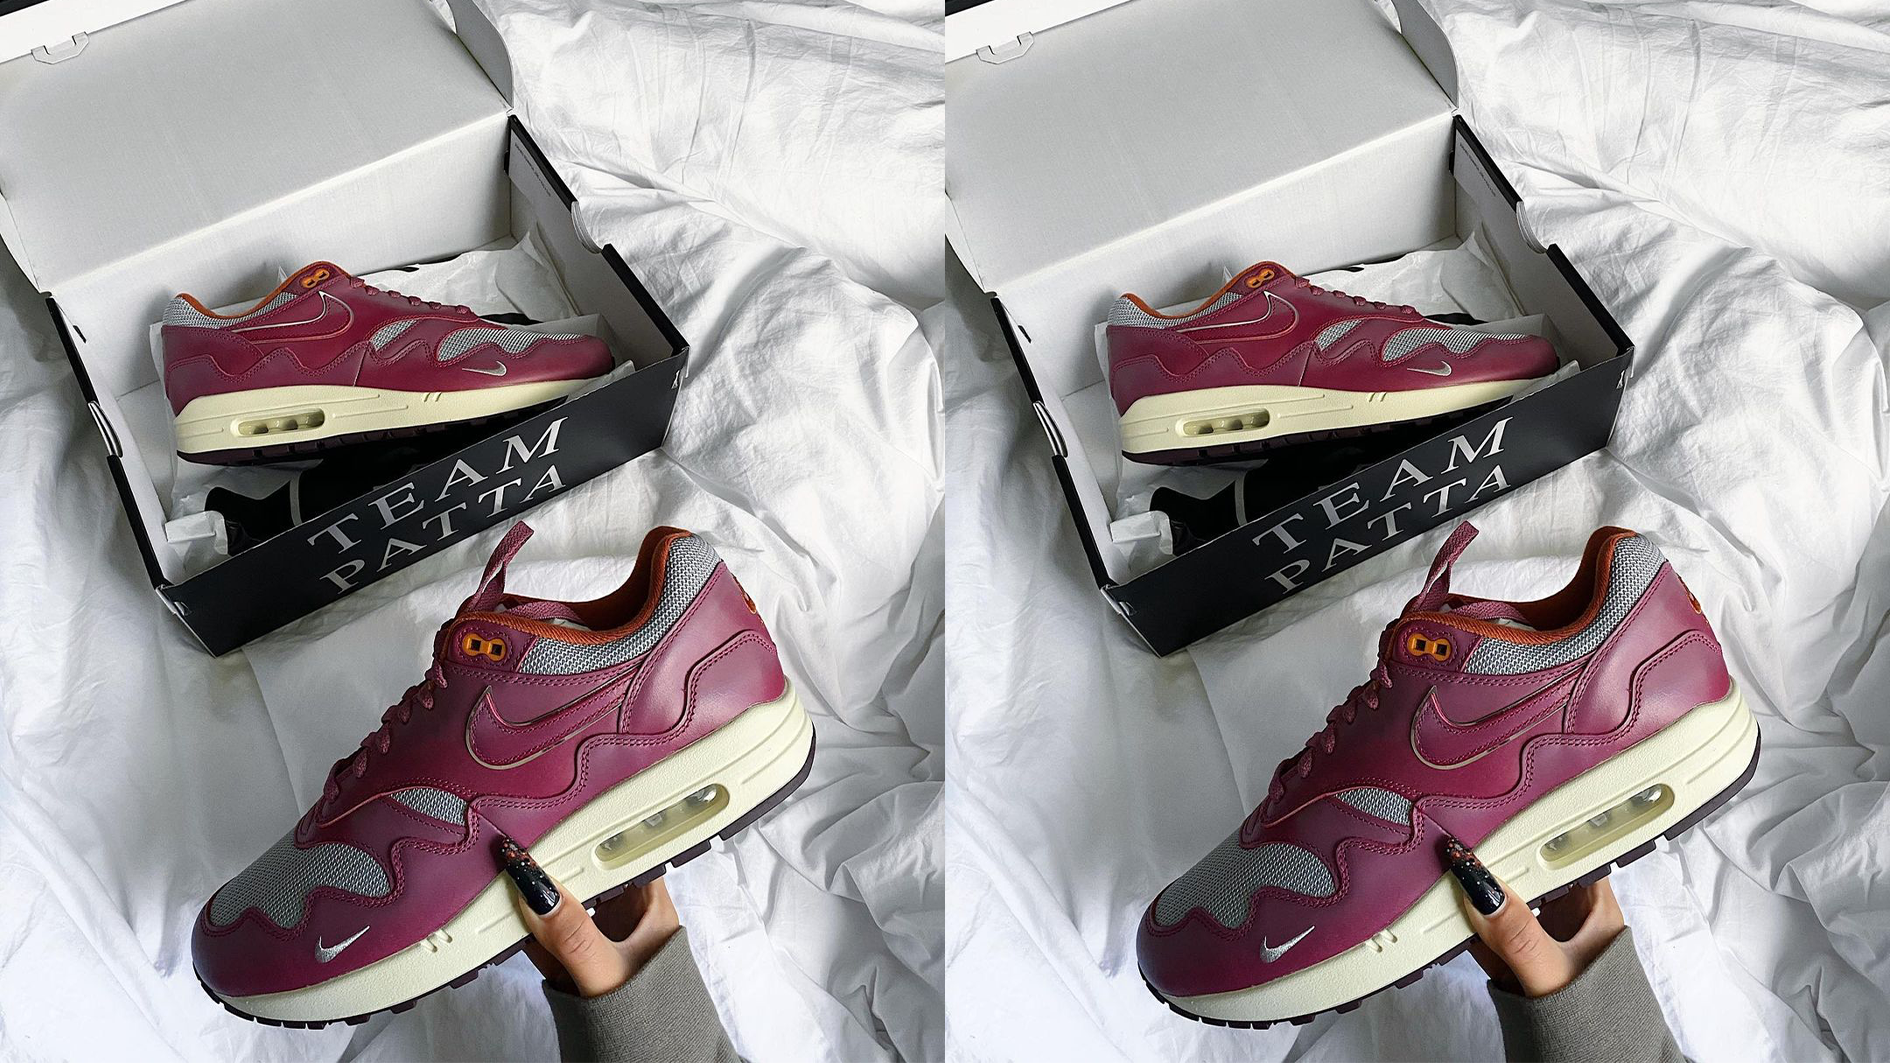 Patta x Nike Air Max 1 Waves Rush Maroon with Bracelet Men's Size 12  DO9549-001